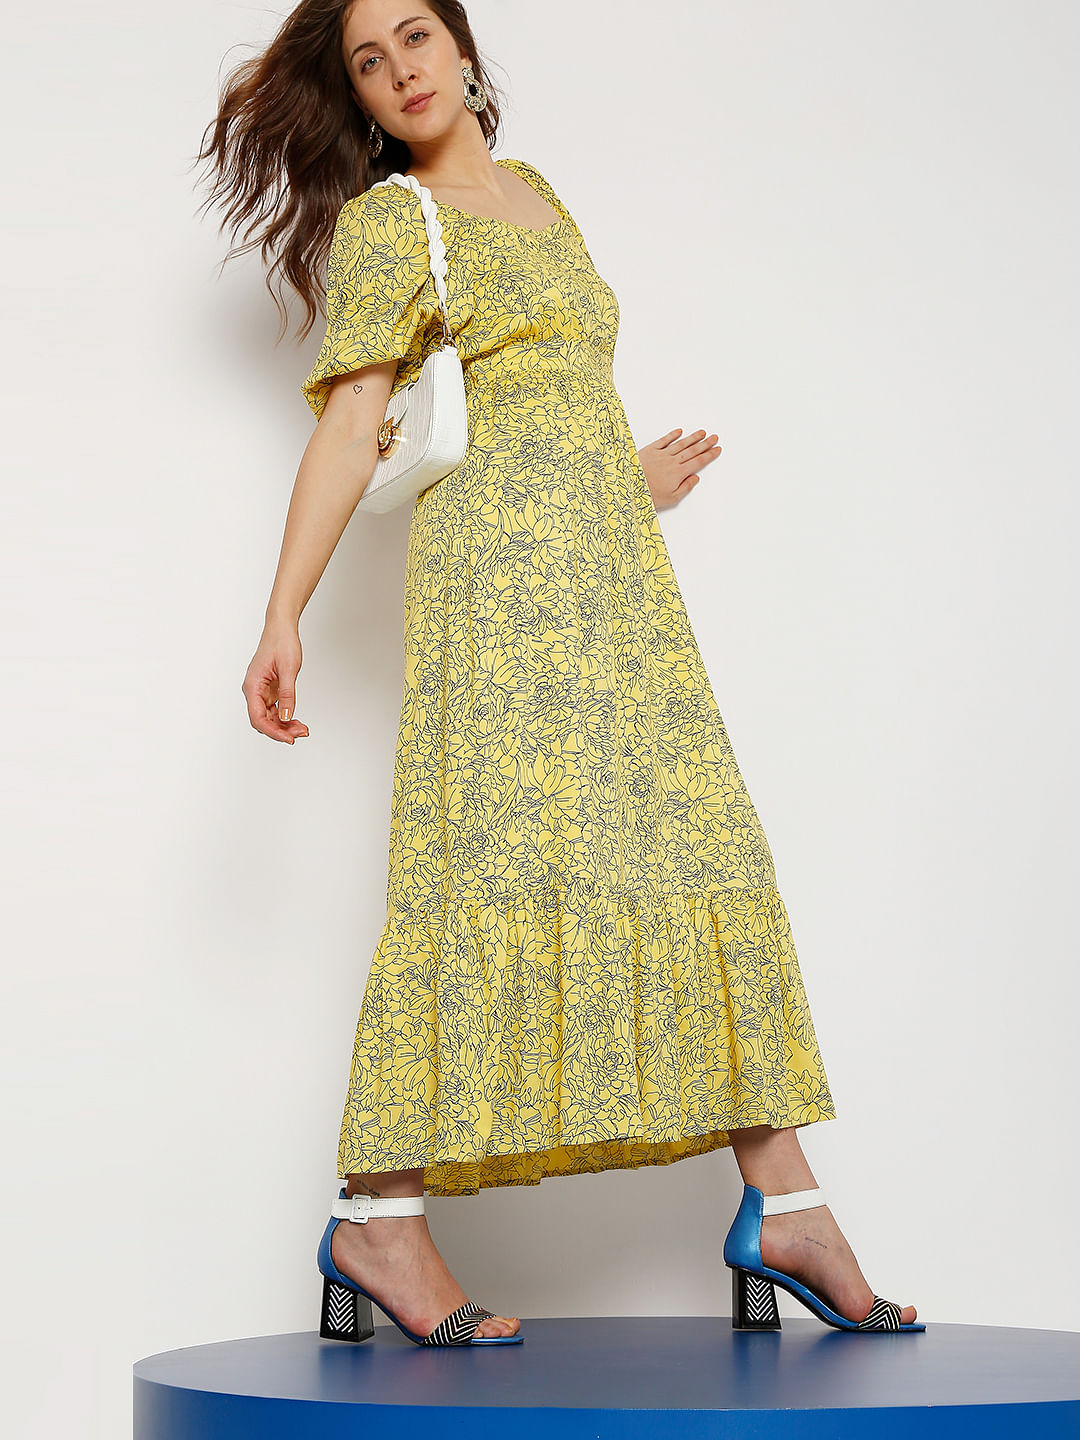 Buy Yellow Floral Print Maxi Dress for Women Online